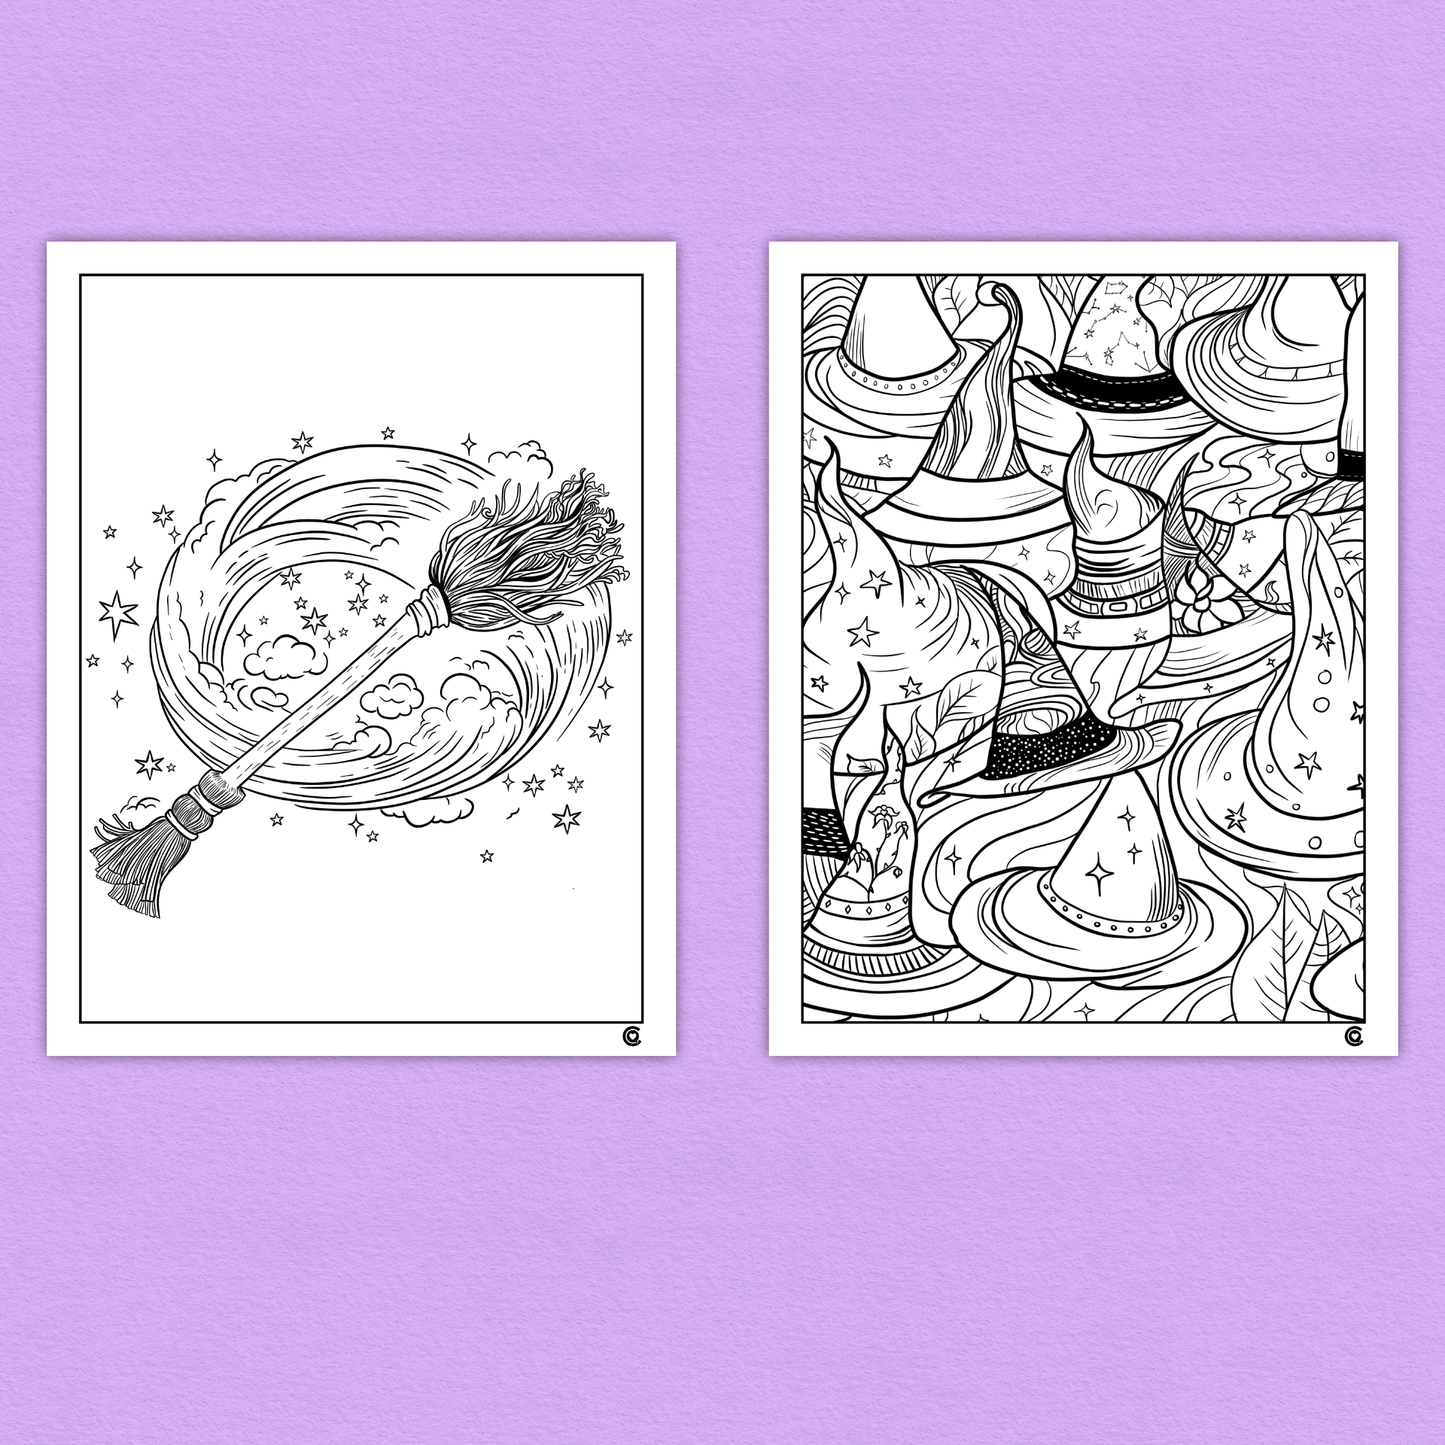 Foodie Coloring Books - an adult colouring book for food lovers